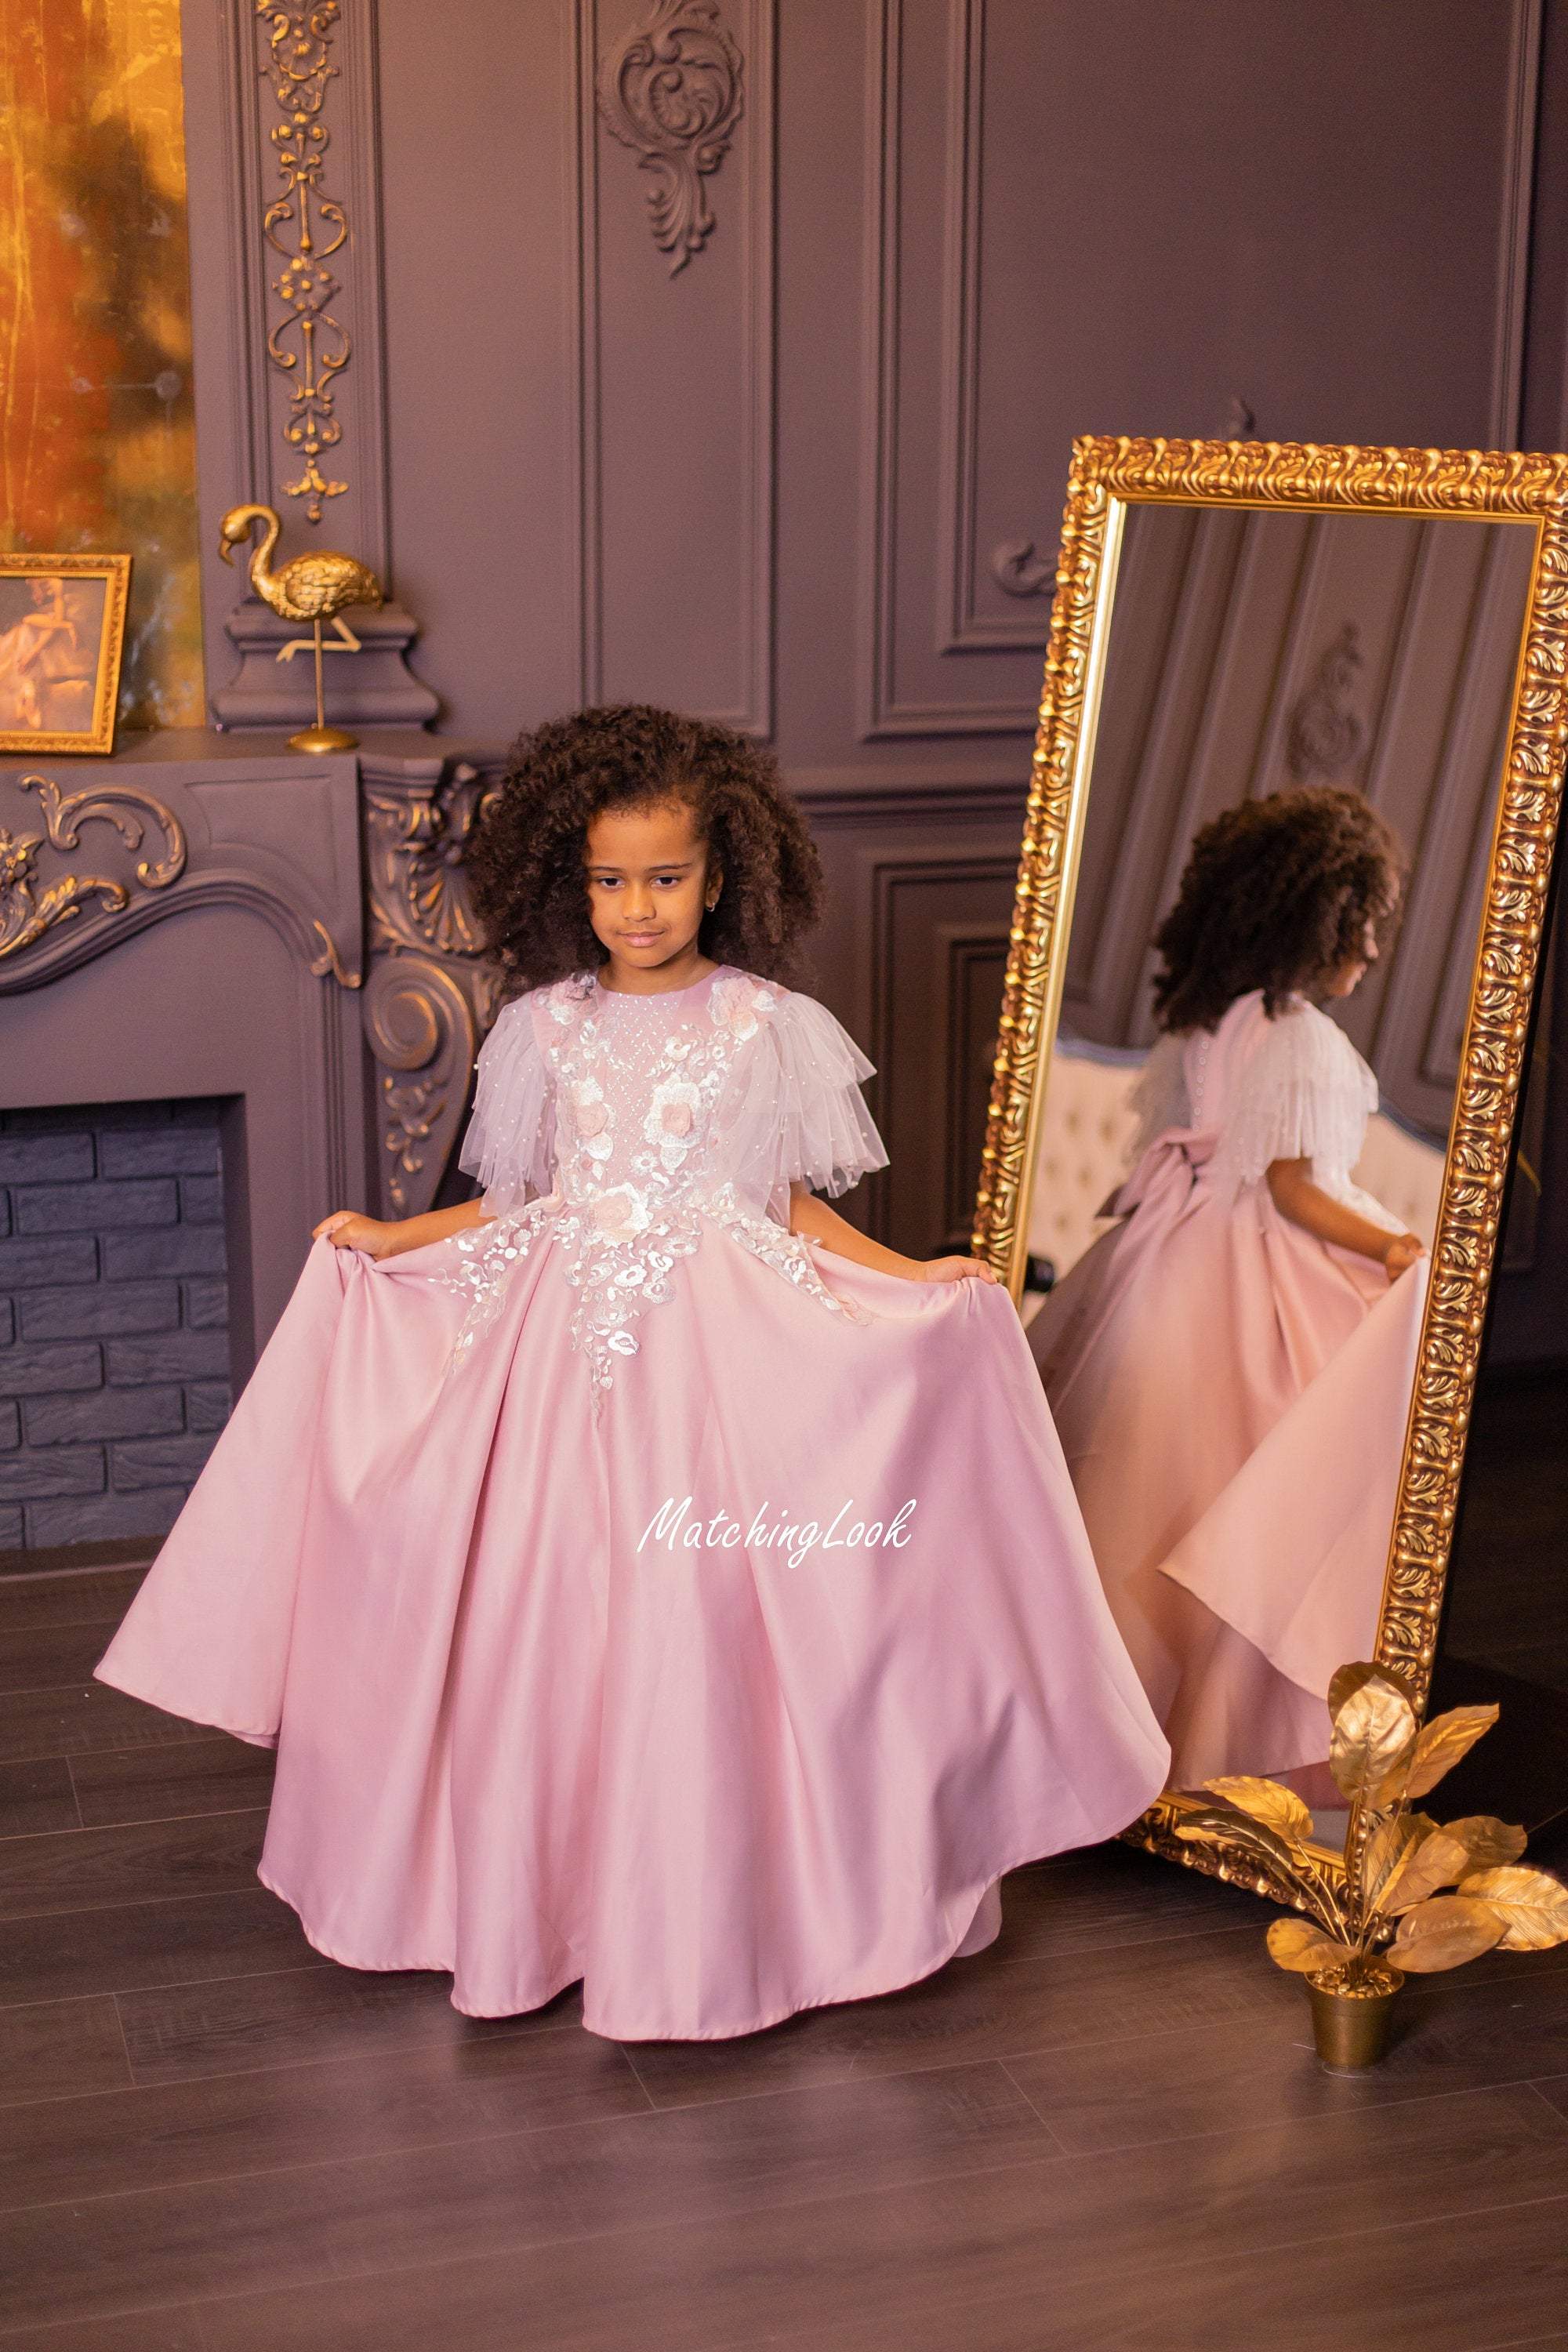 Satin A-Line Flower Girl Gown with Embroidery | David's Bridal